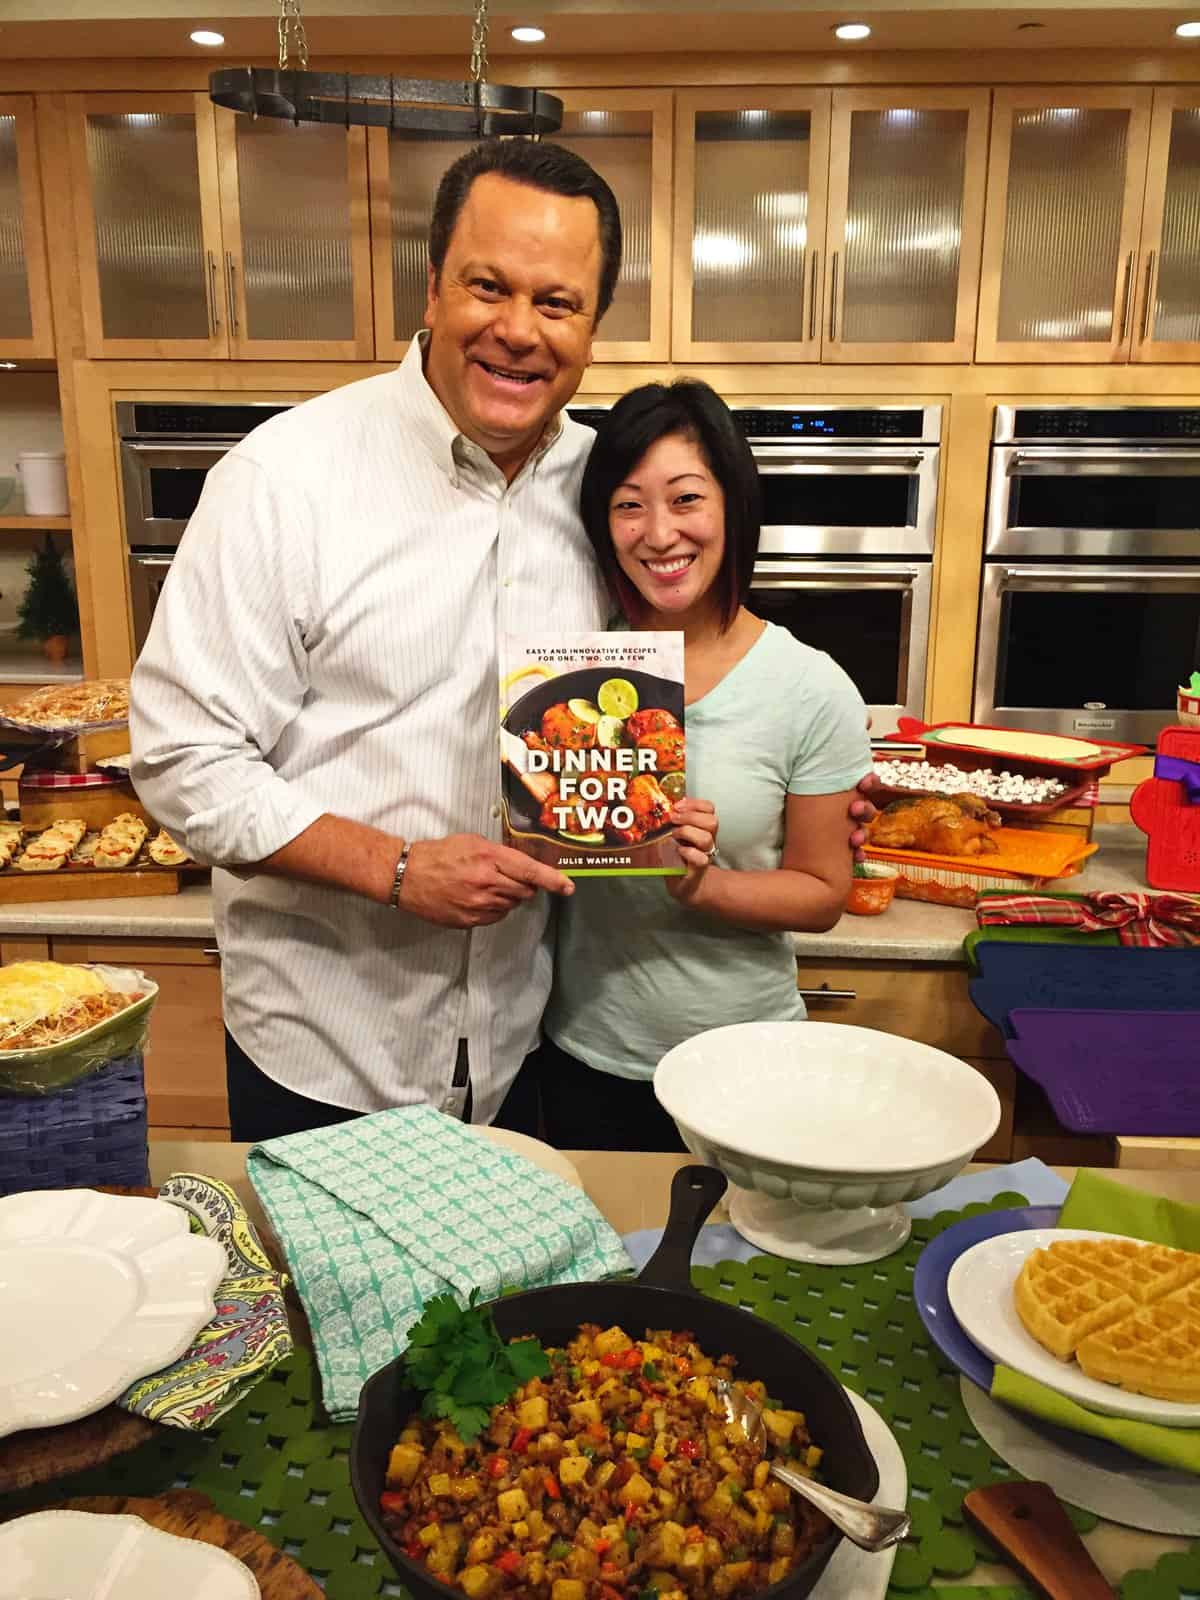 My unforgettable experience at QVC with my Dinner for Two cookbook!